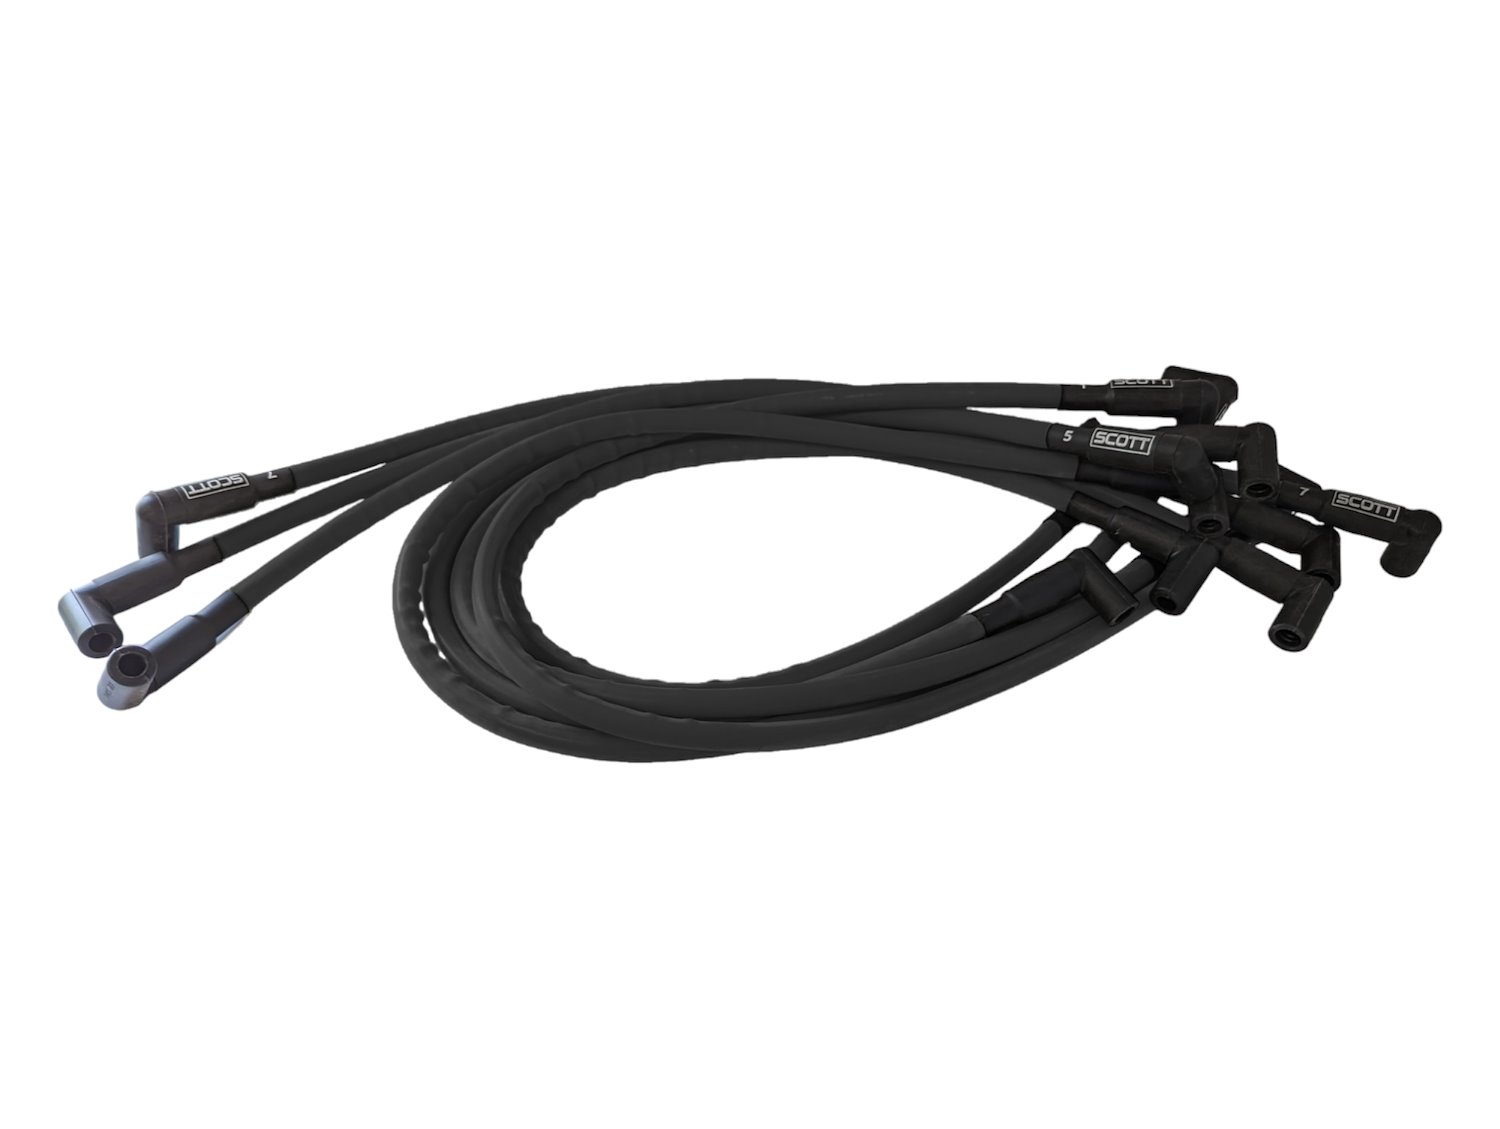 SPW-CH-439-1 High-Performance Silicone-Sleeved Spark Plug Wire Set for Small Block Ford, Under Header [Black]